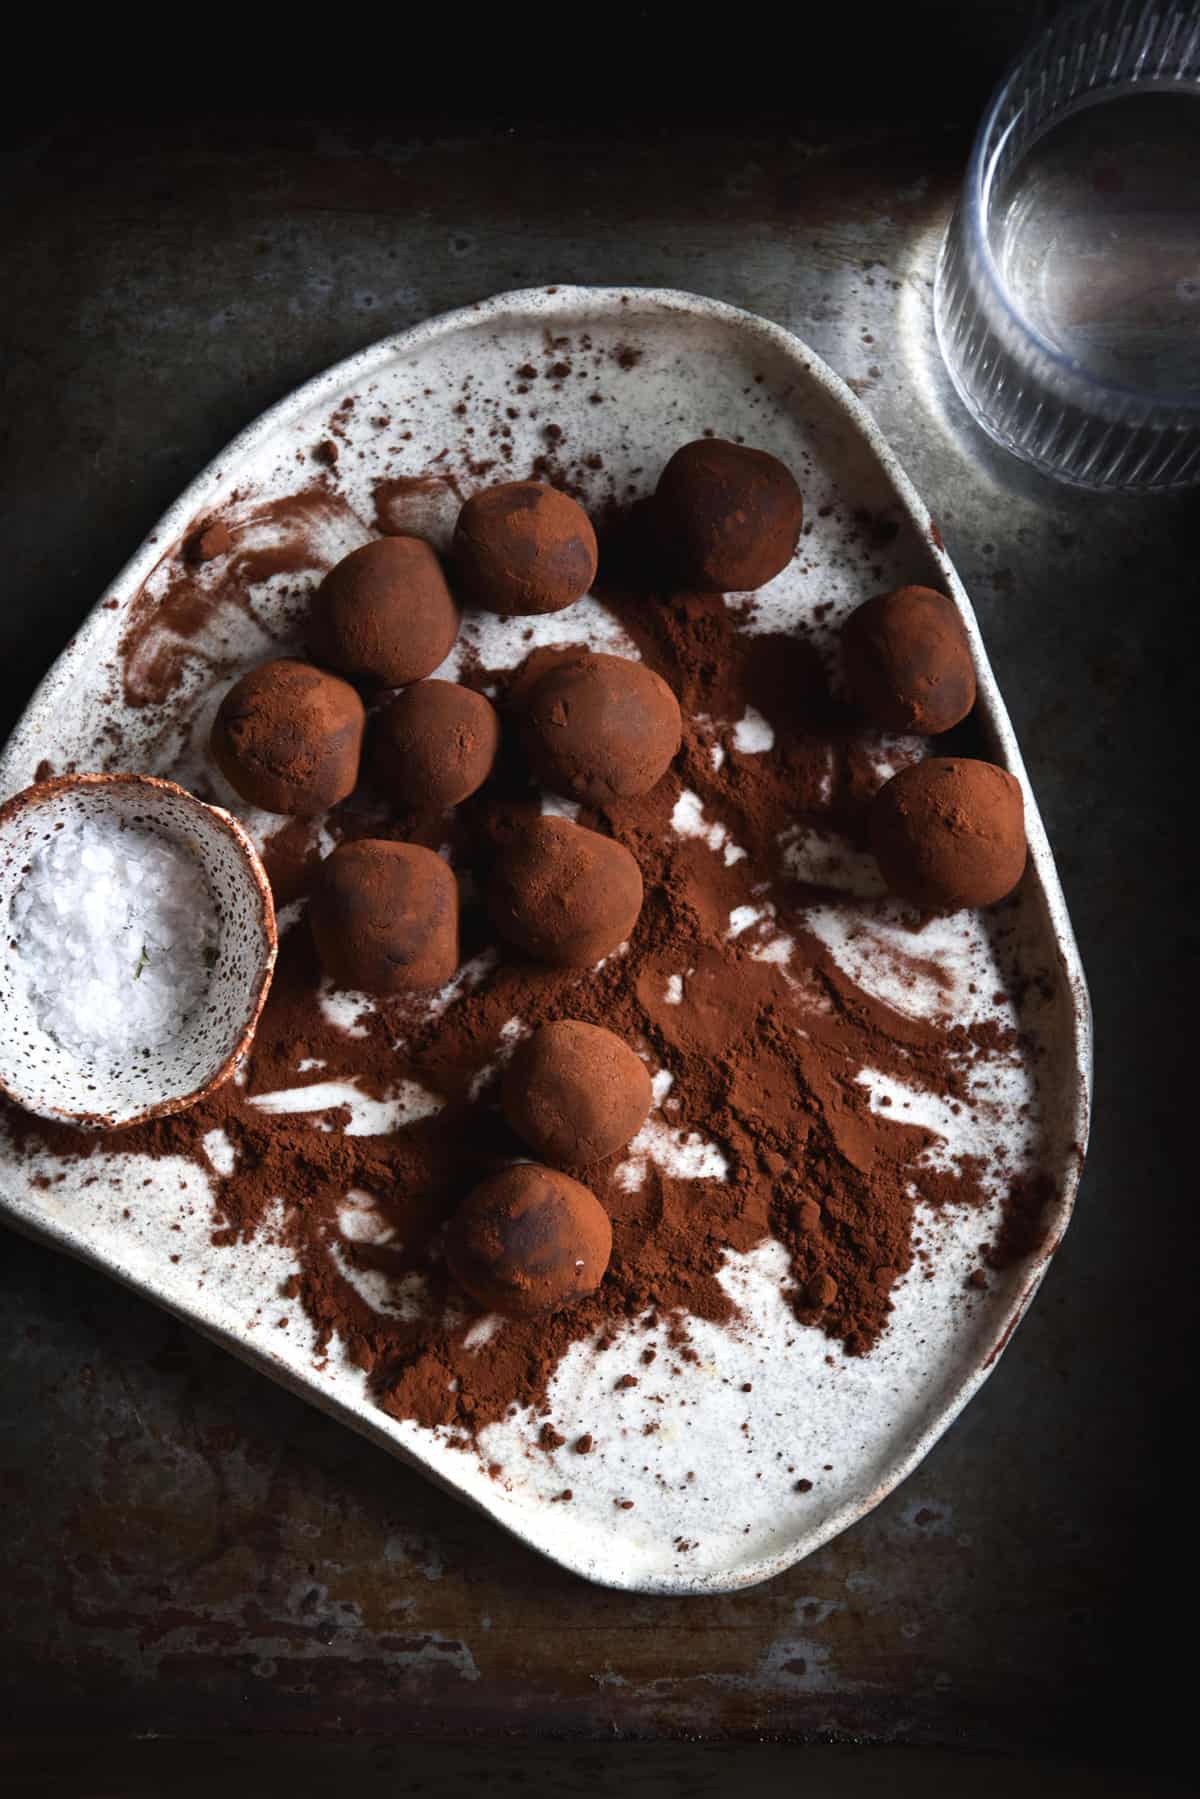 An aerial moody image of vegan Nutella truffles on a white ceramic plate against a dark steel backdrop. The truffles are covered in cocoa and a pinch bowl of sea salt sits to the left of them,